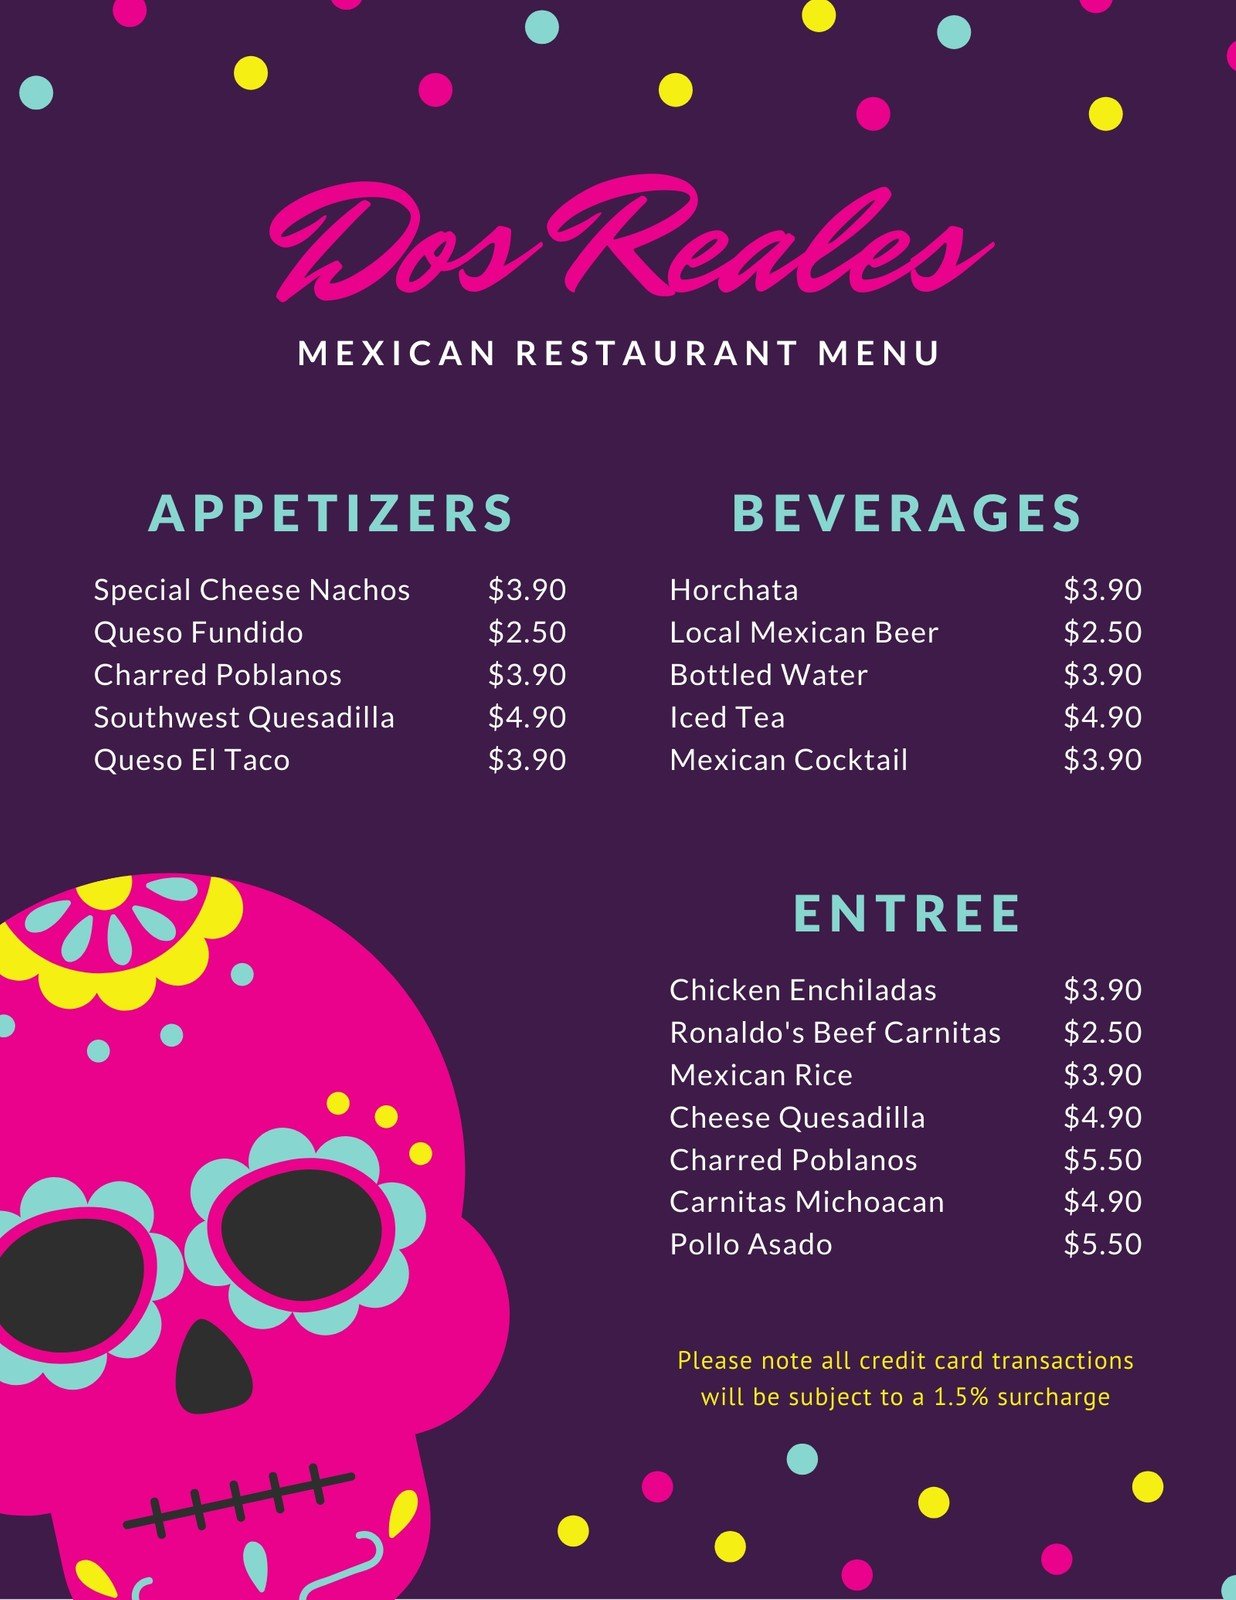 Free printable and customizable Mexican menu templates | Canva